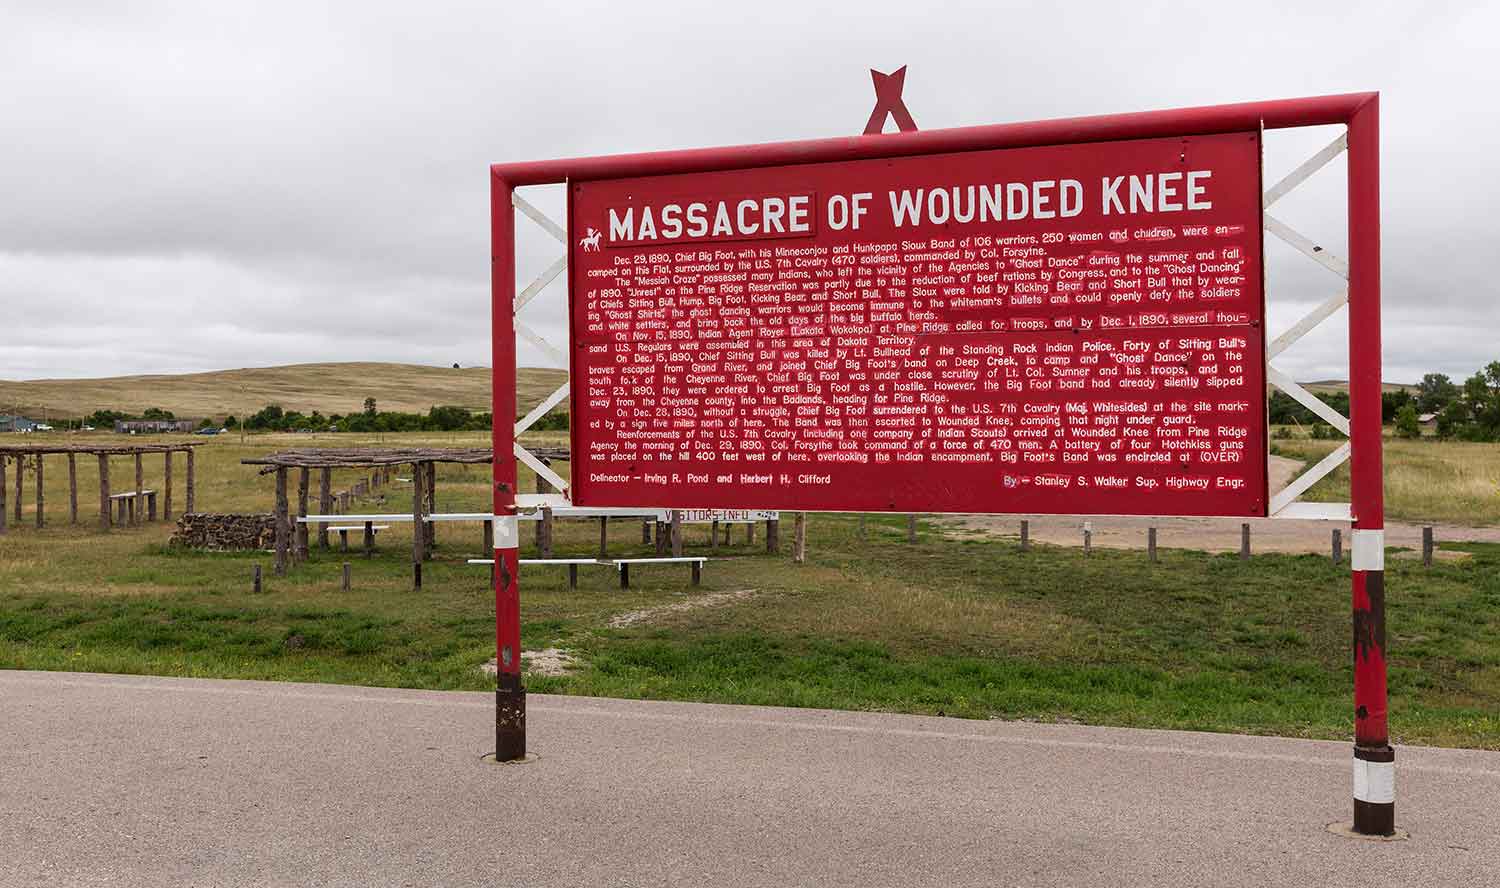 A plaque called Massacre of Wounded Knee tells the story of the massacre and stands in front of a hilly landscape.